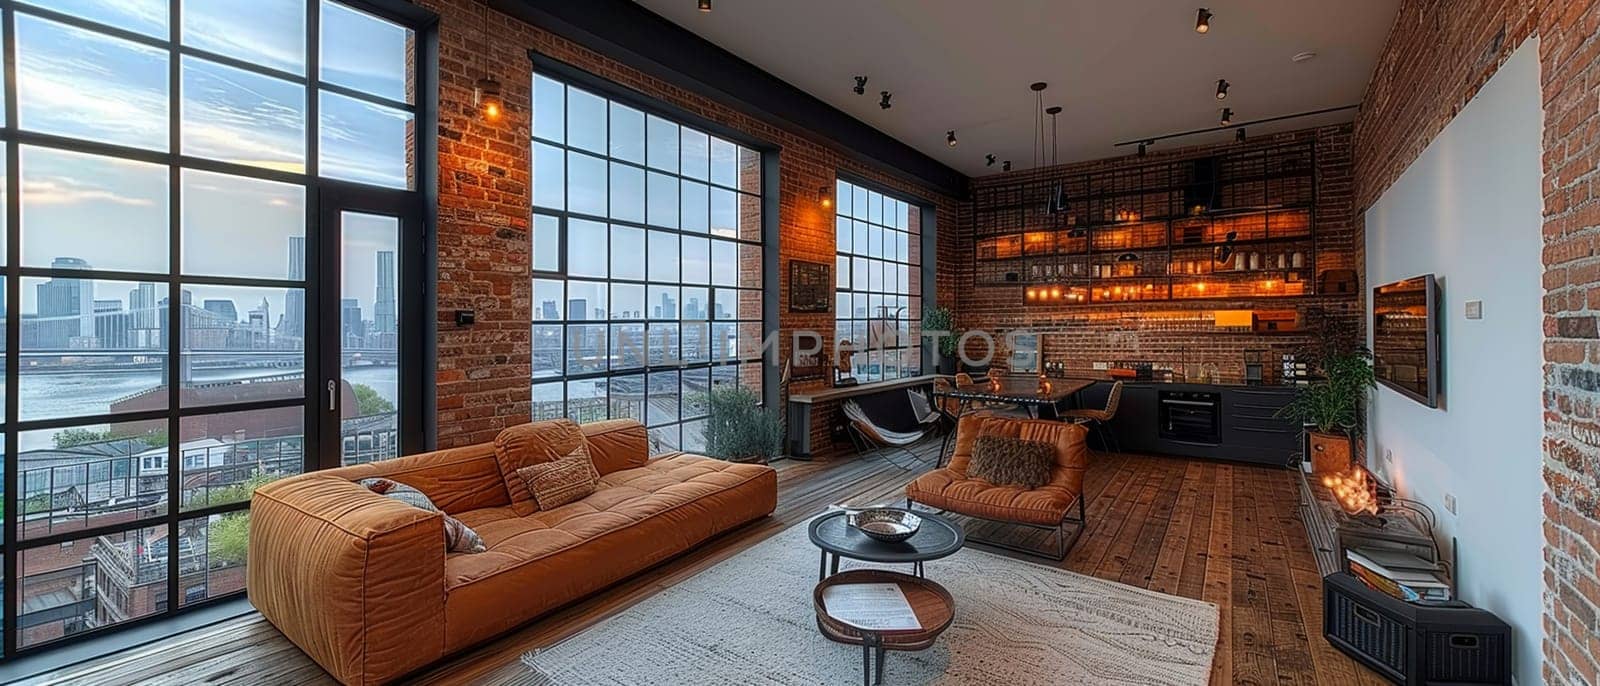 Chic Urban Loft with Exposed Brick and Industrial Features, loft living urban style.